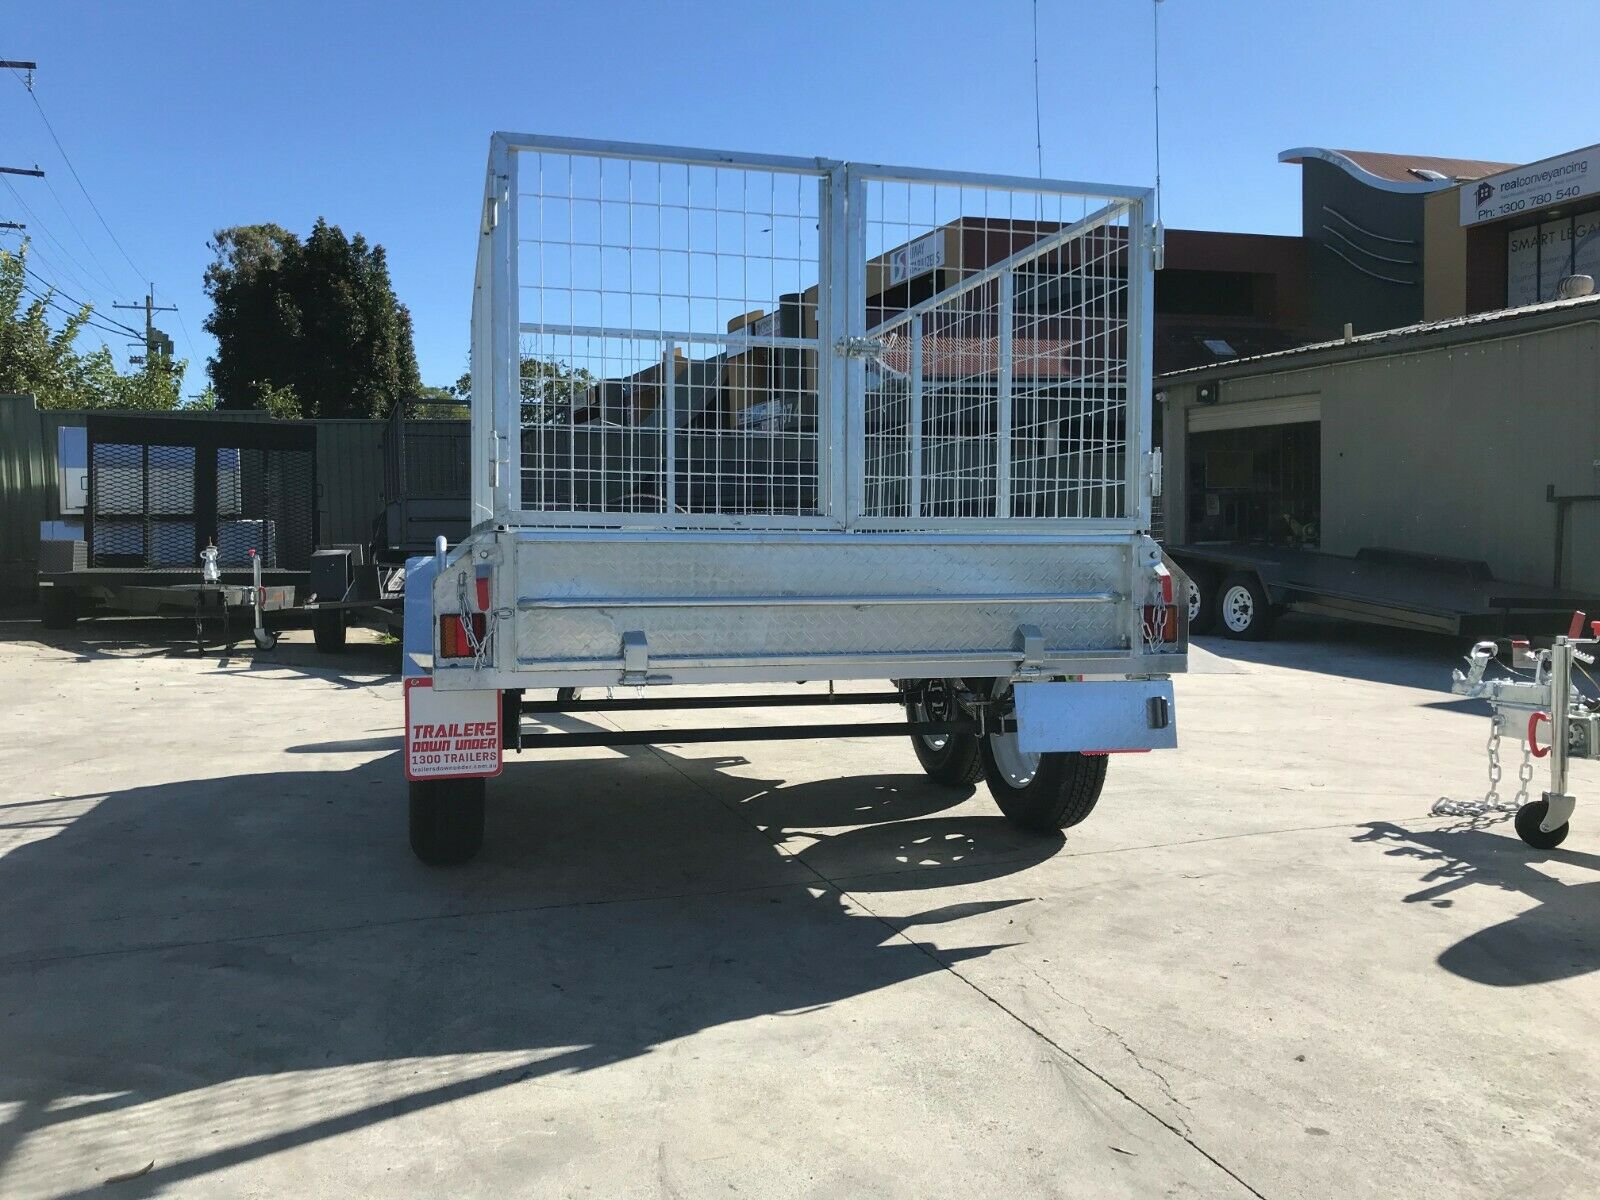 8×5 Tandem Axle Galvanised Trailer with 3 Ft Cage For Sale in Brisbane<br><br><span class="galv-import">Imported Trailer</span>